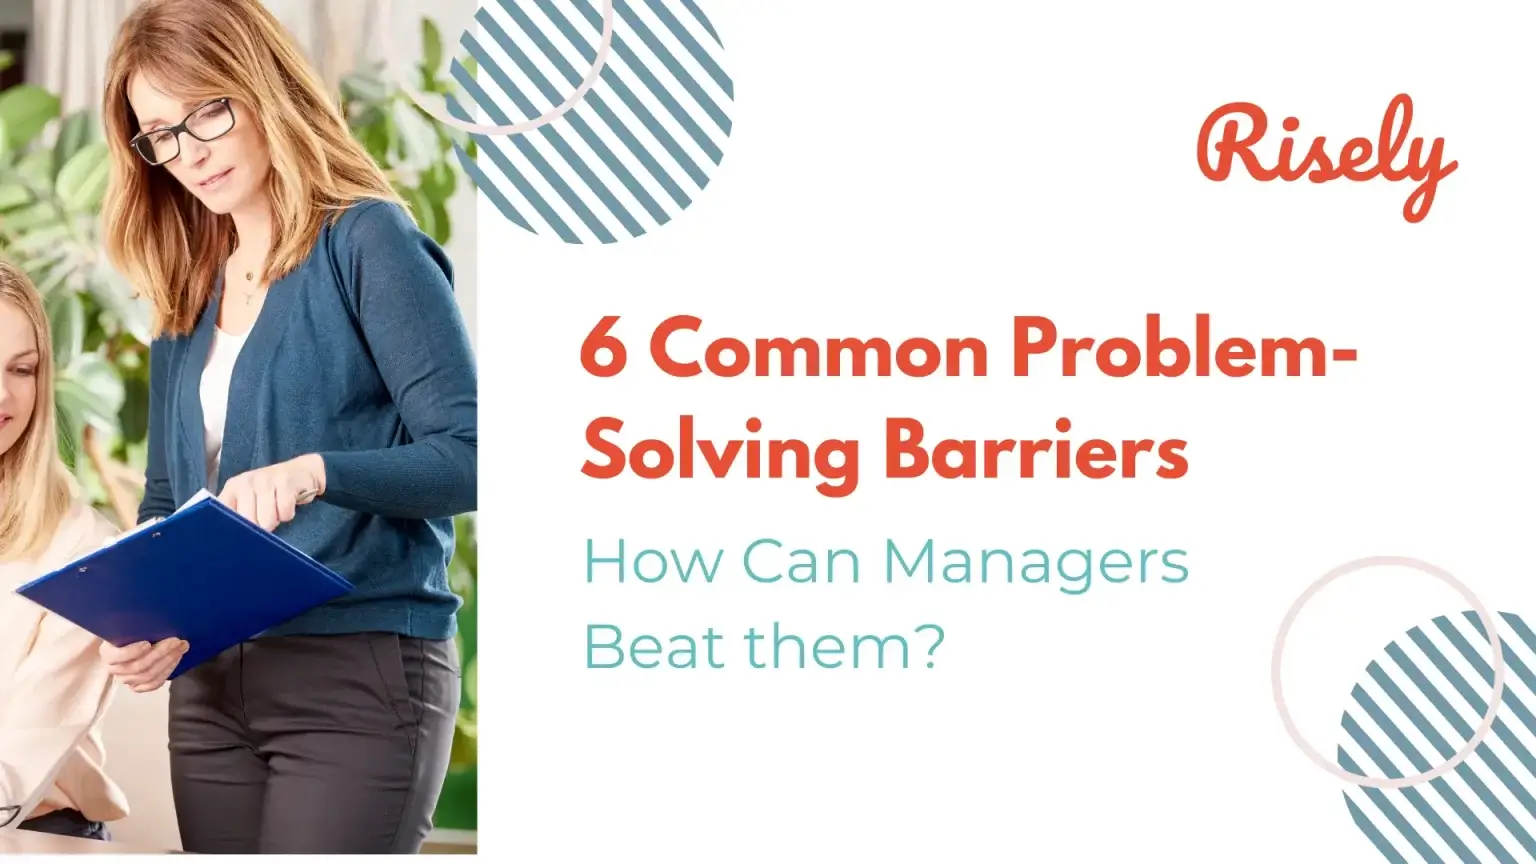 barriers to effective problem solving psychology